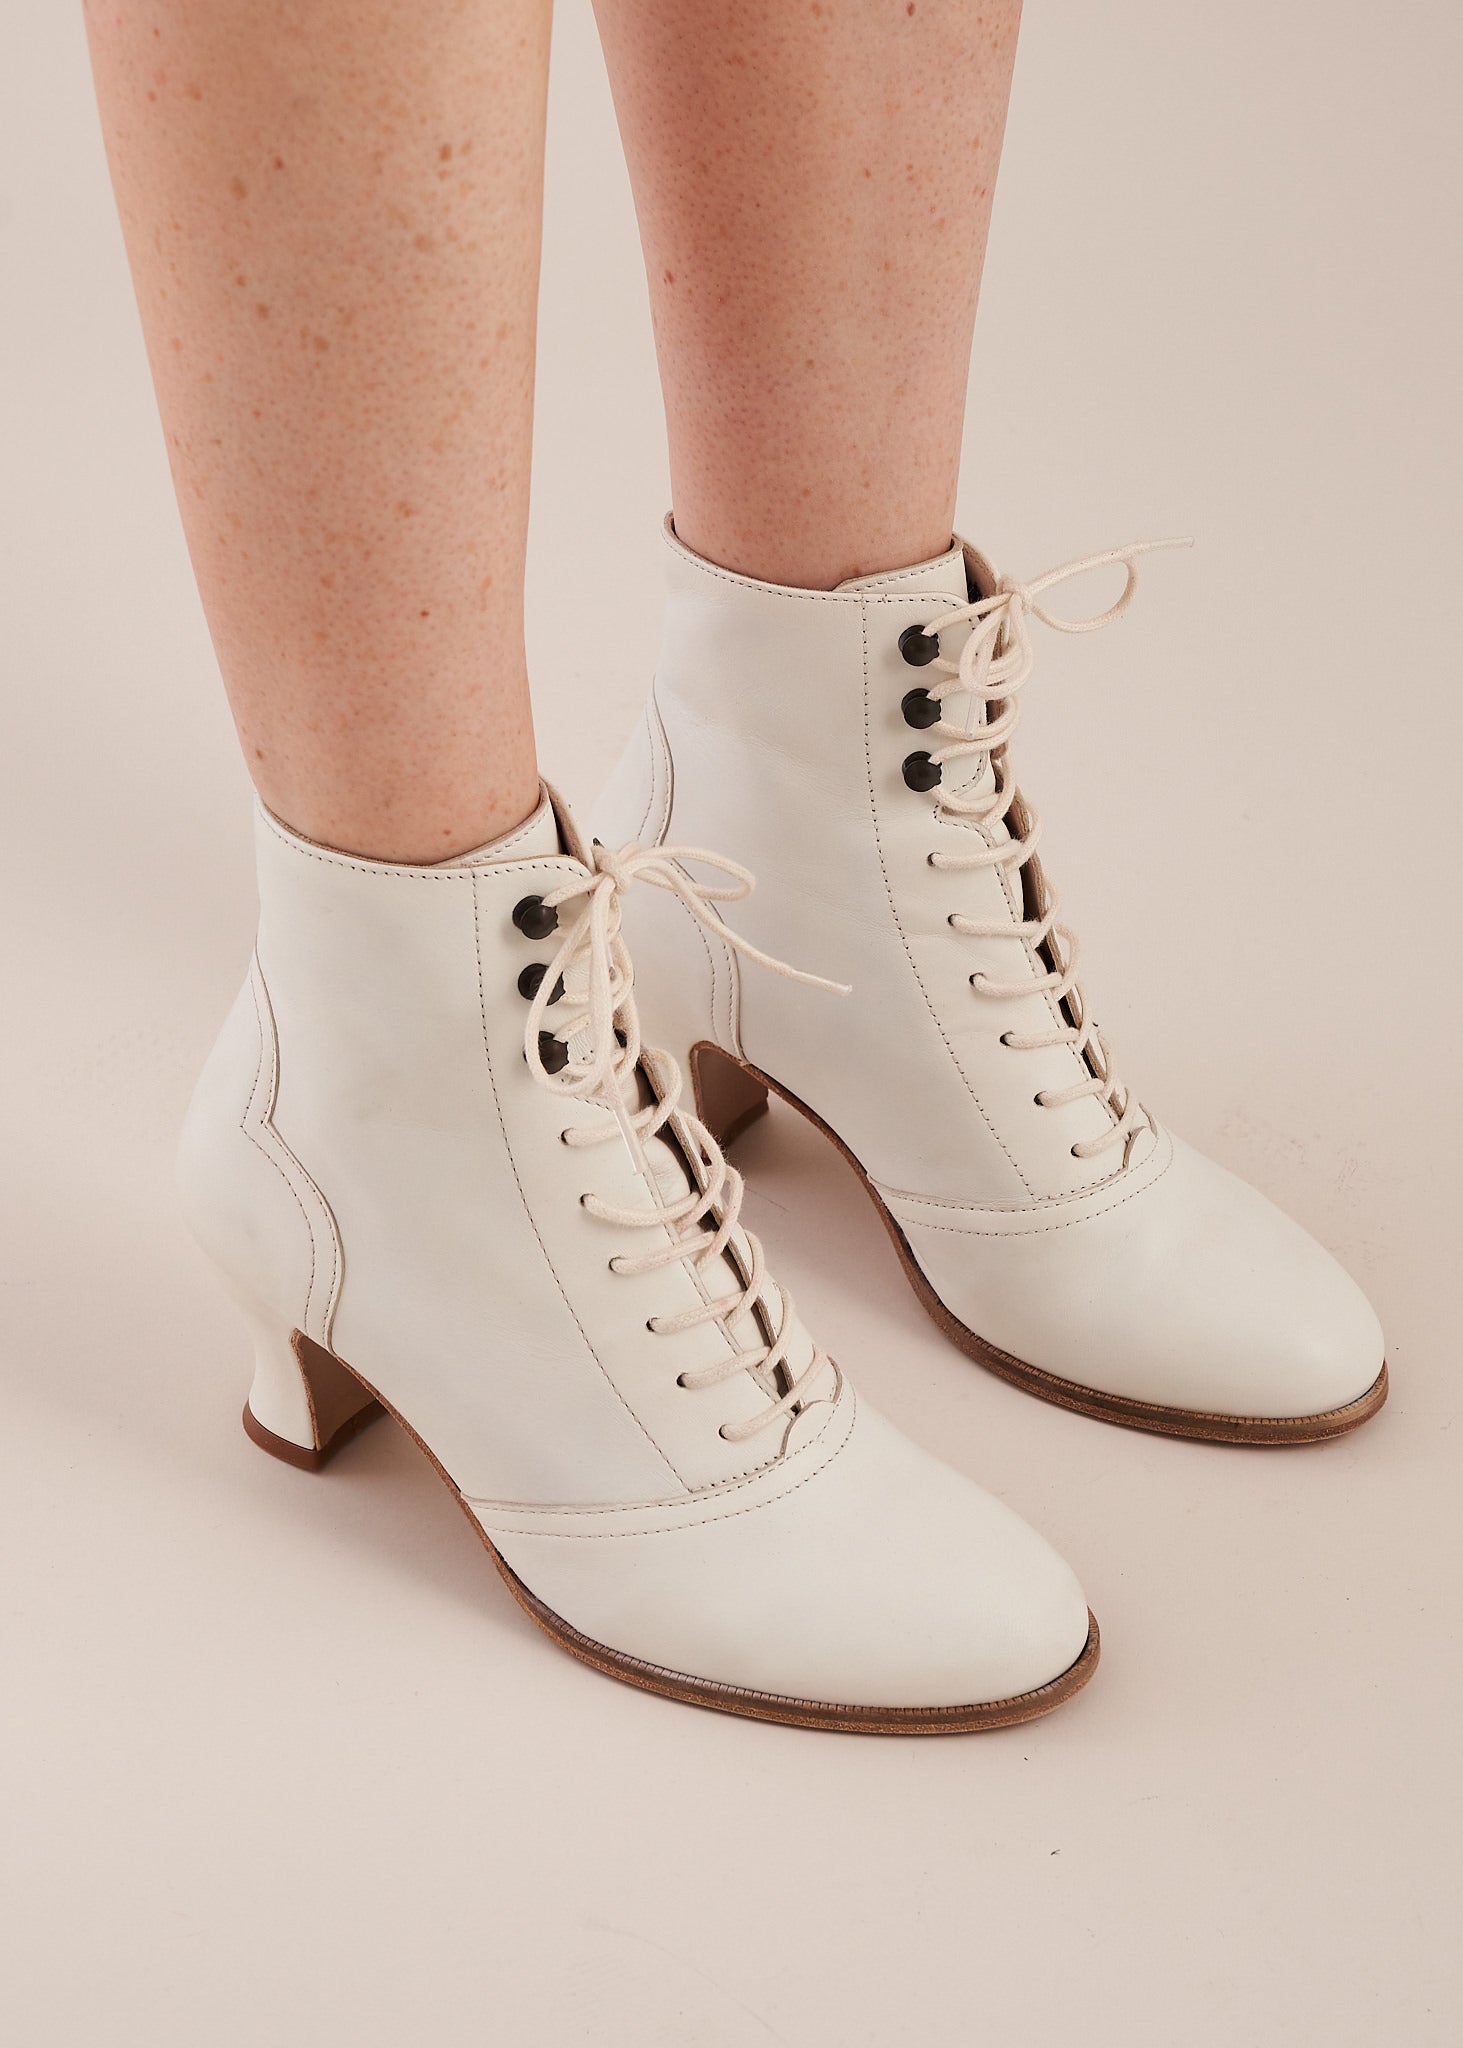 cream leather boots